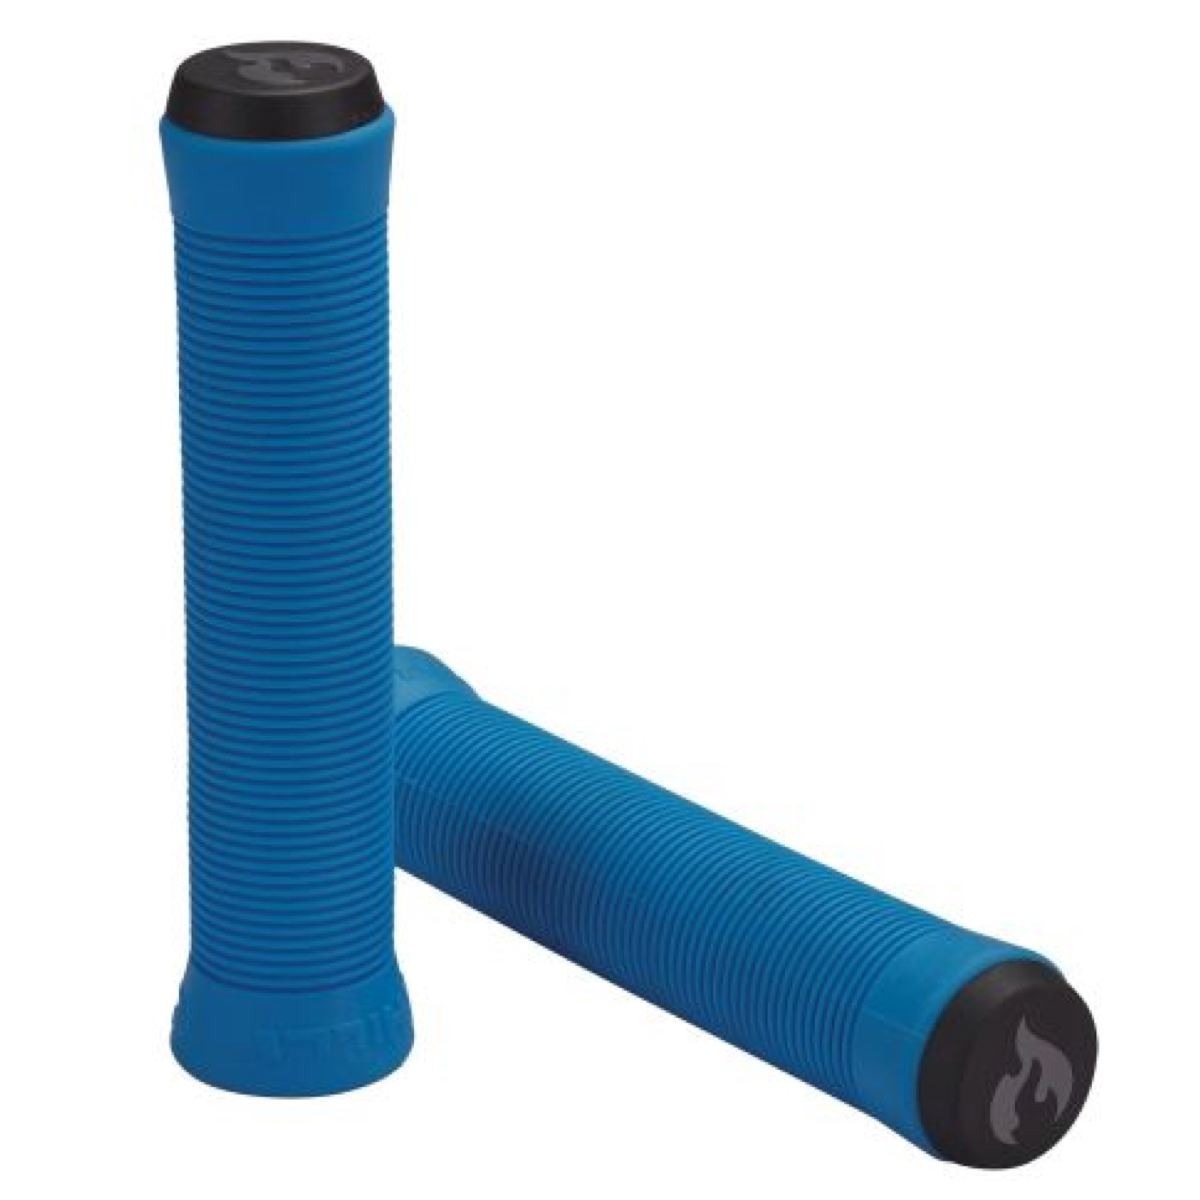 Puños (Grips) - iBikes Store